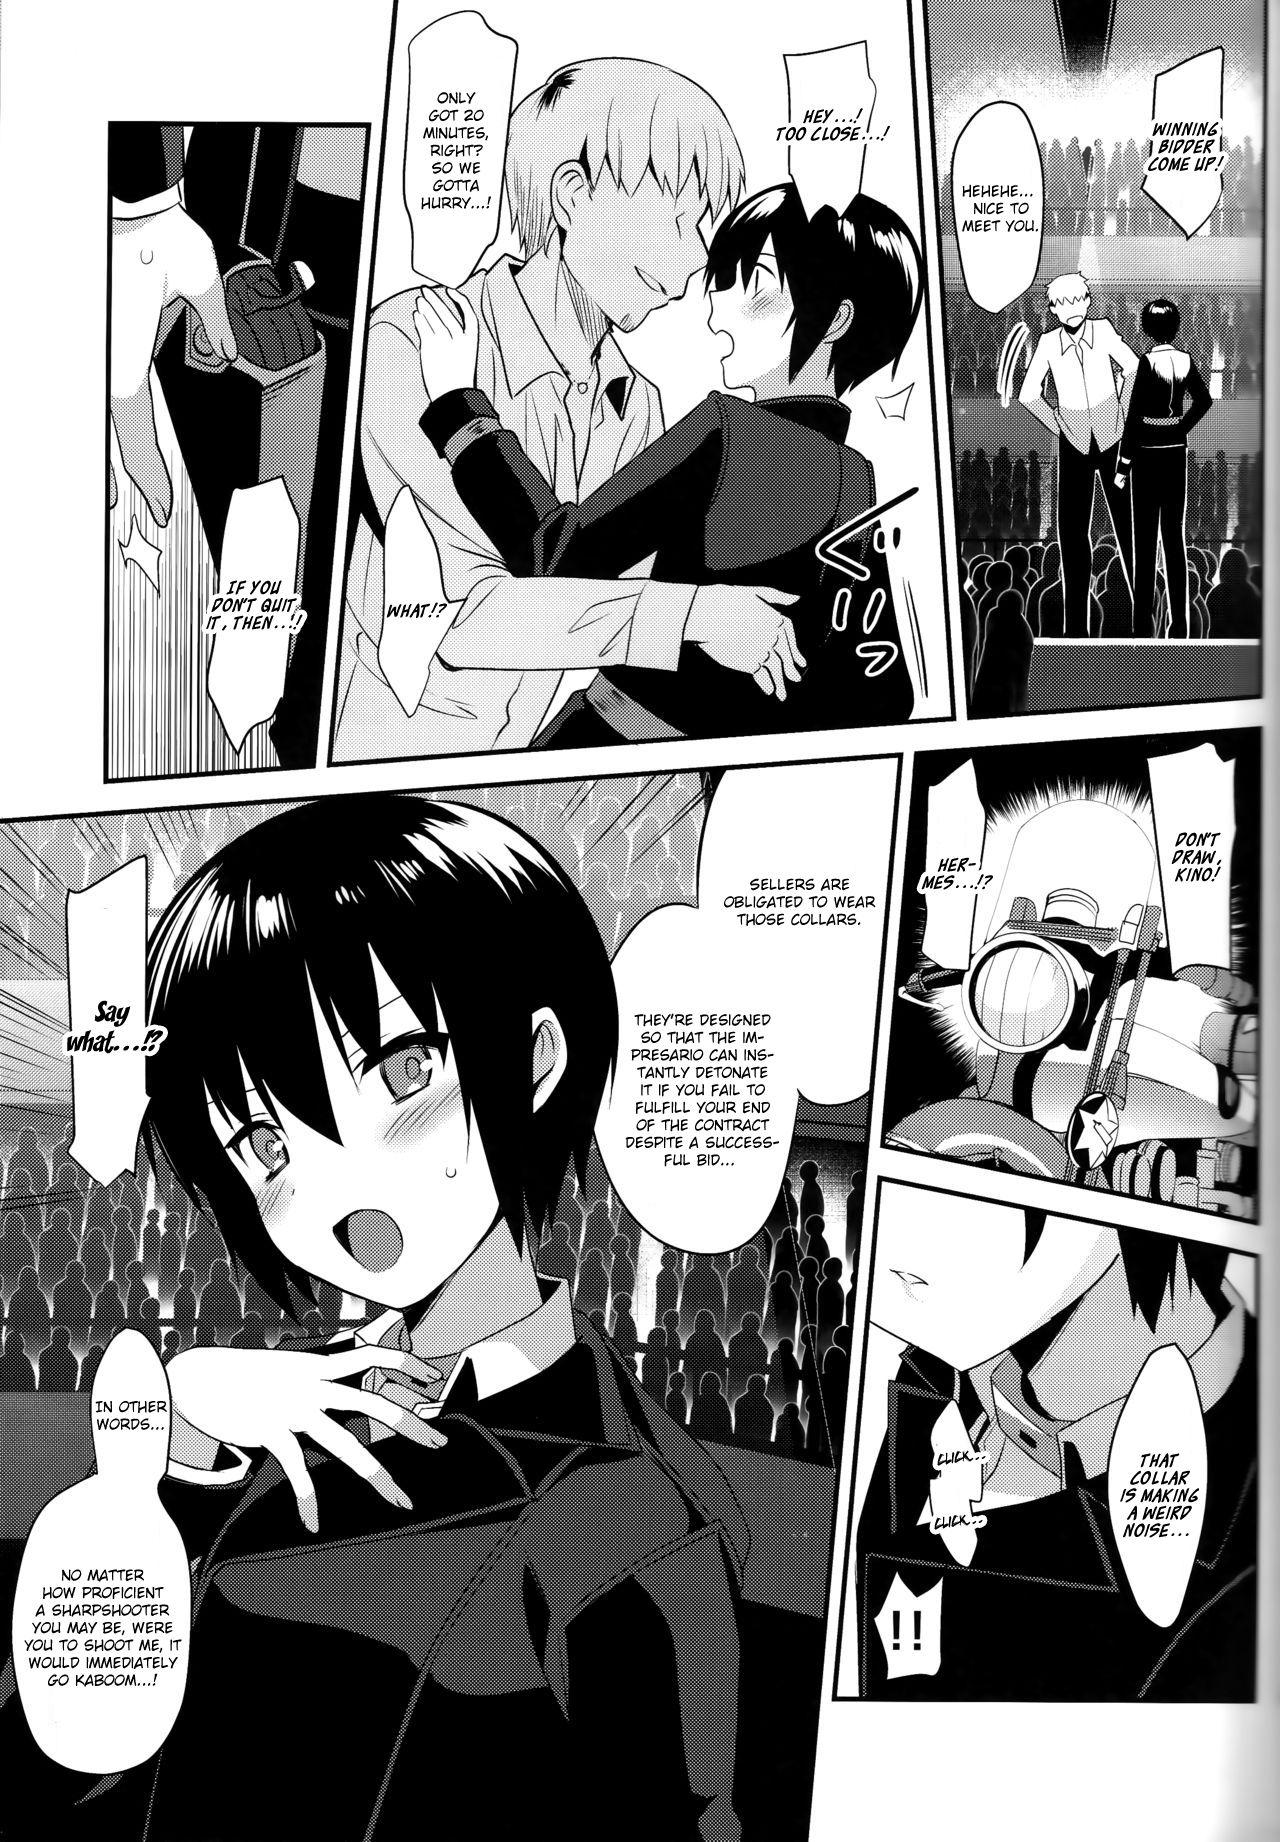 Amature Porn Fuun na Tabibito no Hanashi 2 | The Tale of an Unfortunate Traveller 2 - Kino no tabi Best Blow Jobs Ever - Page 4